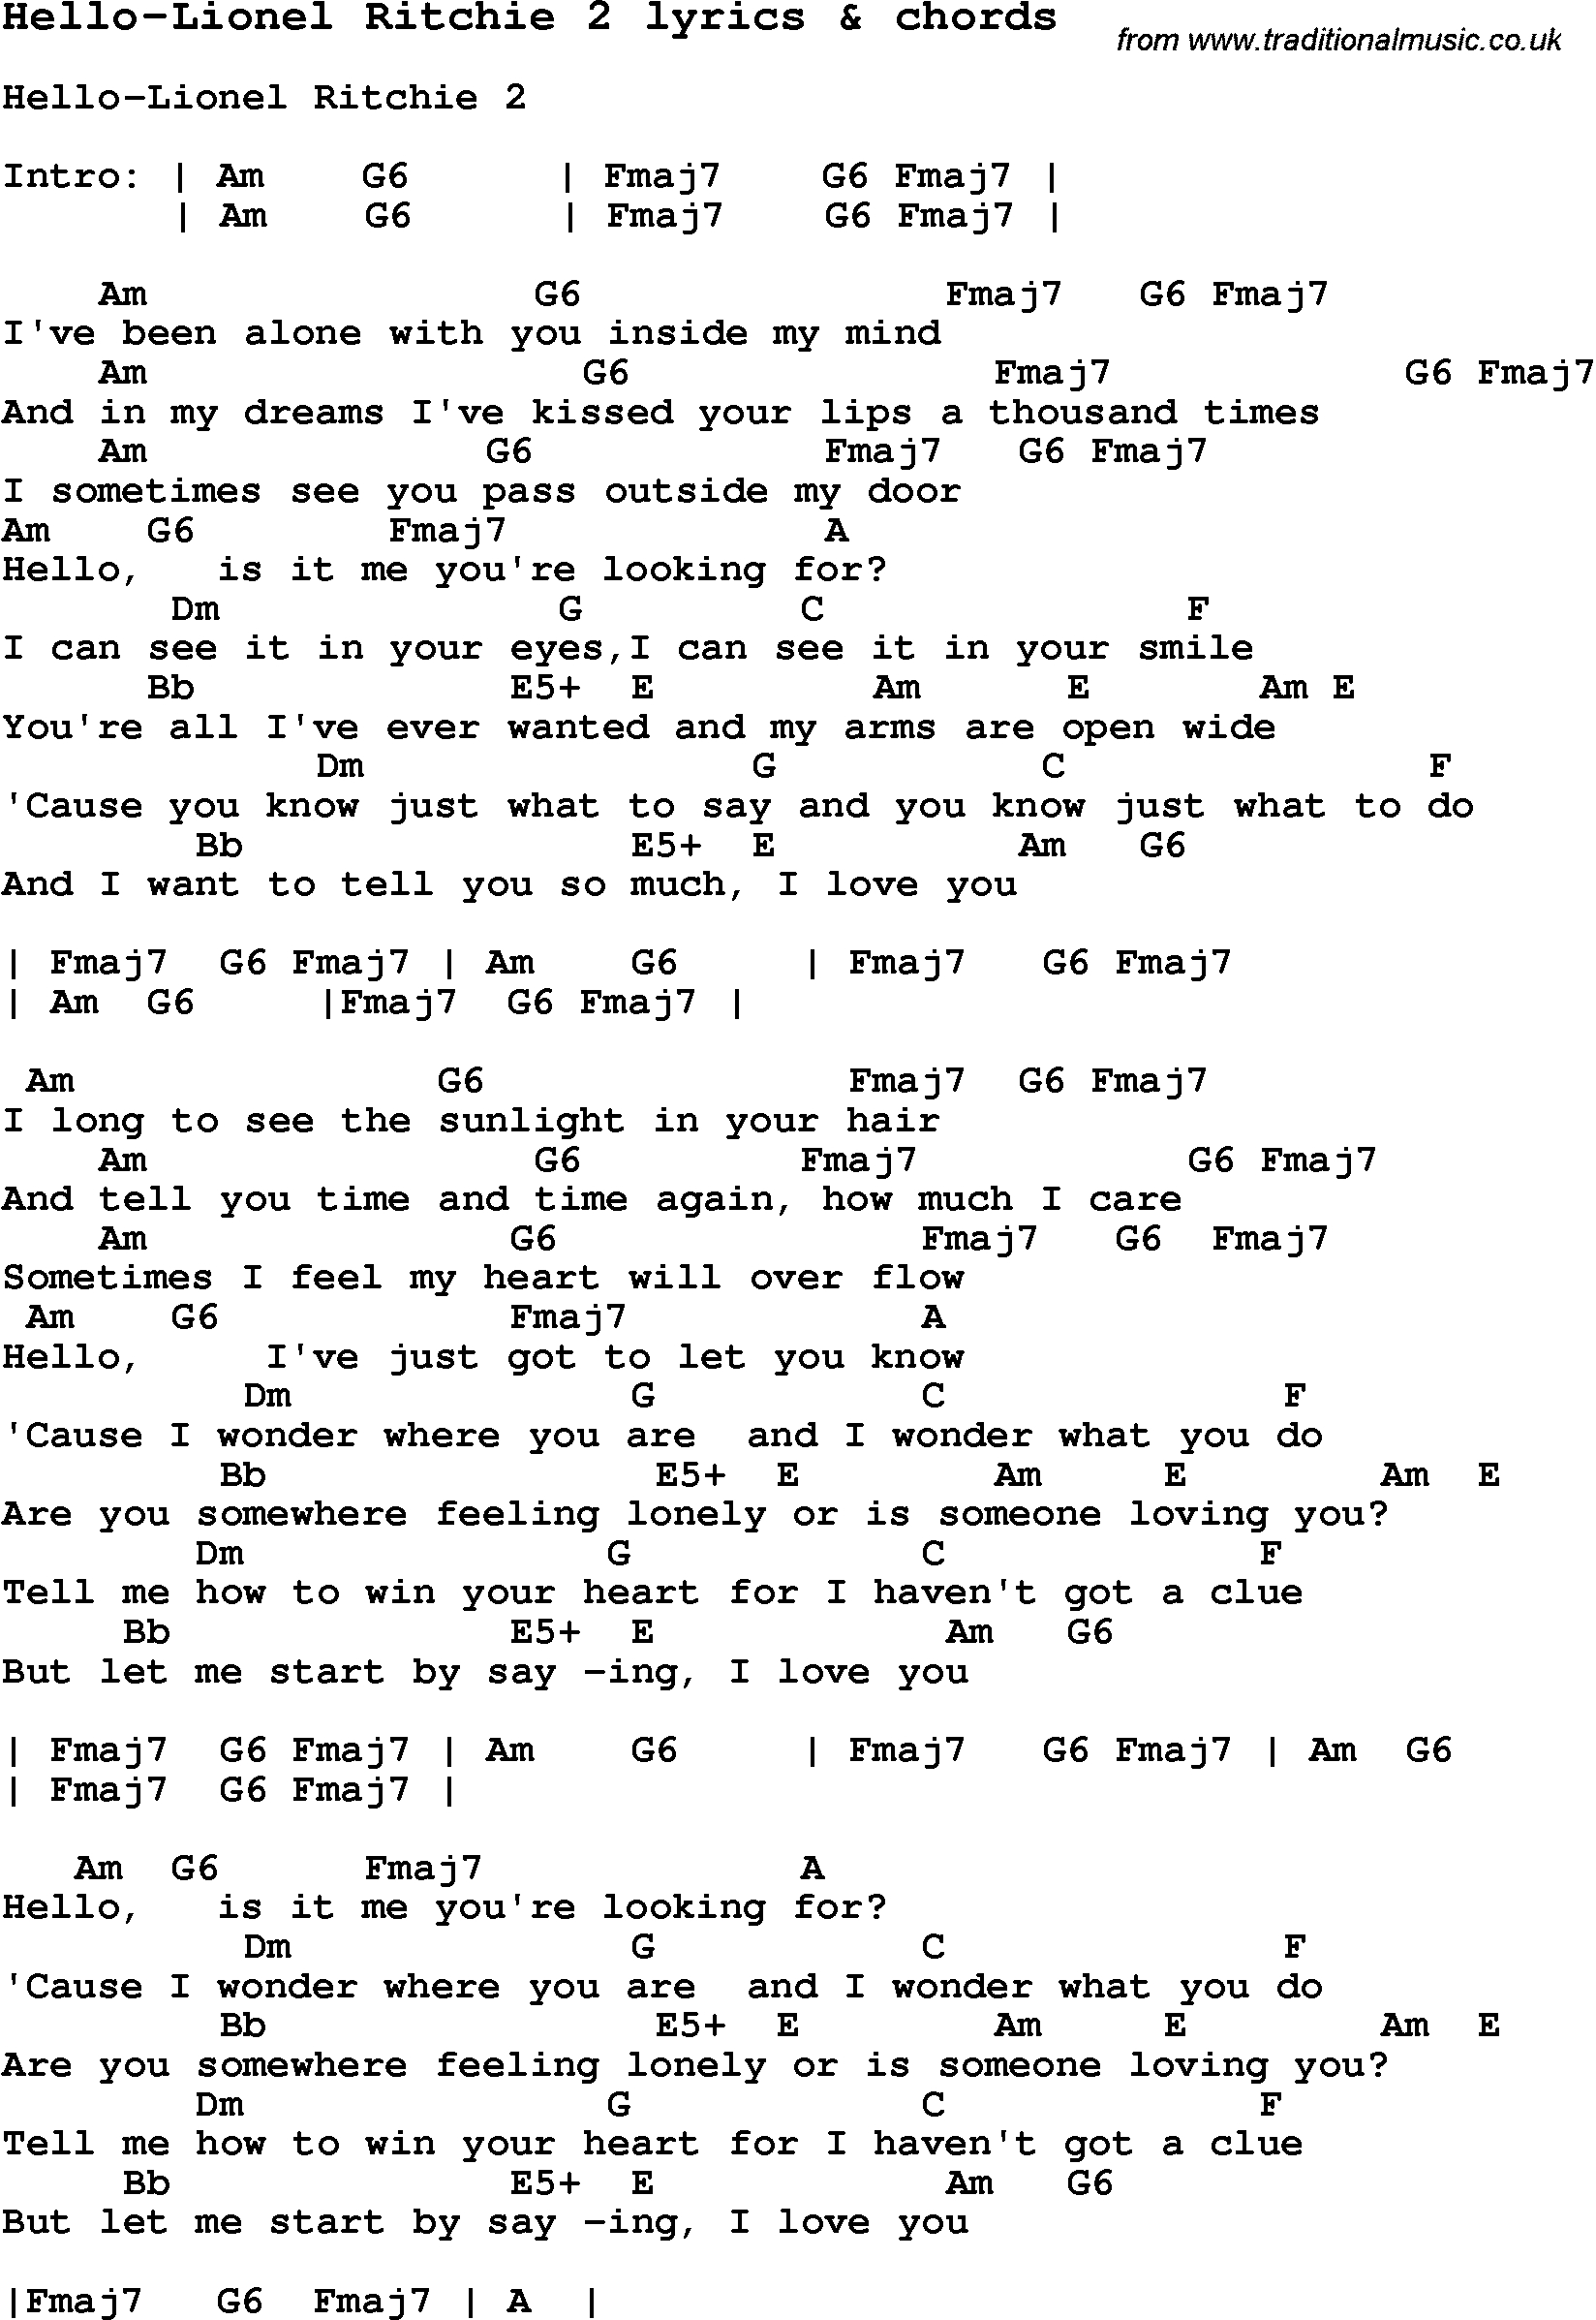 Hello Ukulele Chords Love Song Lyrics Forhello Lionel Ritchie 2 With Chords